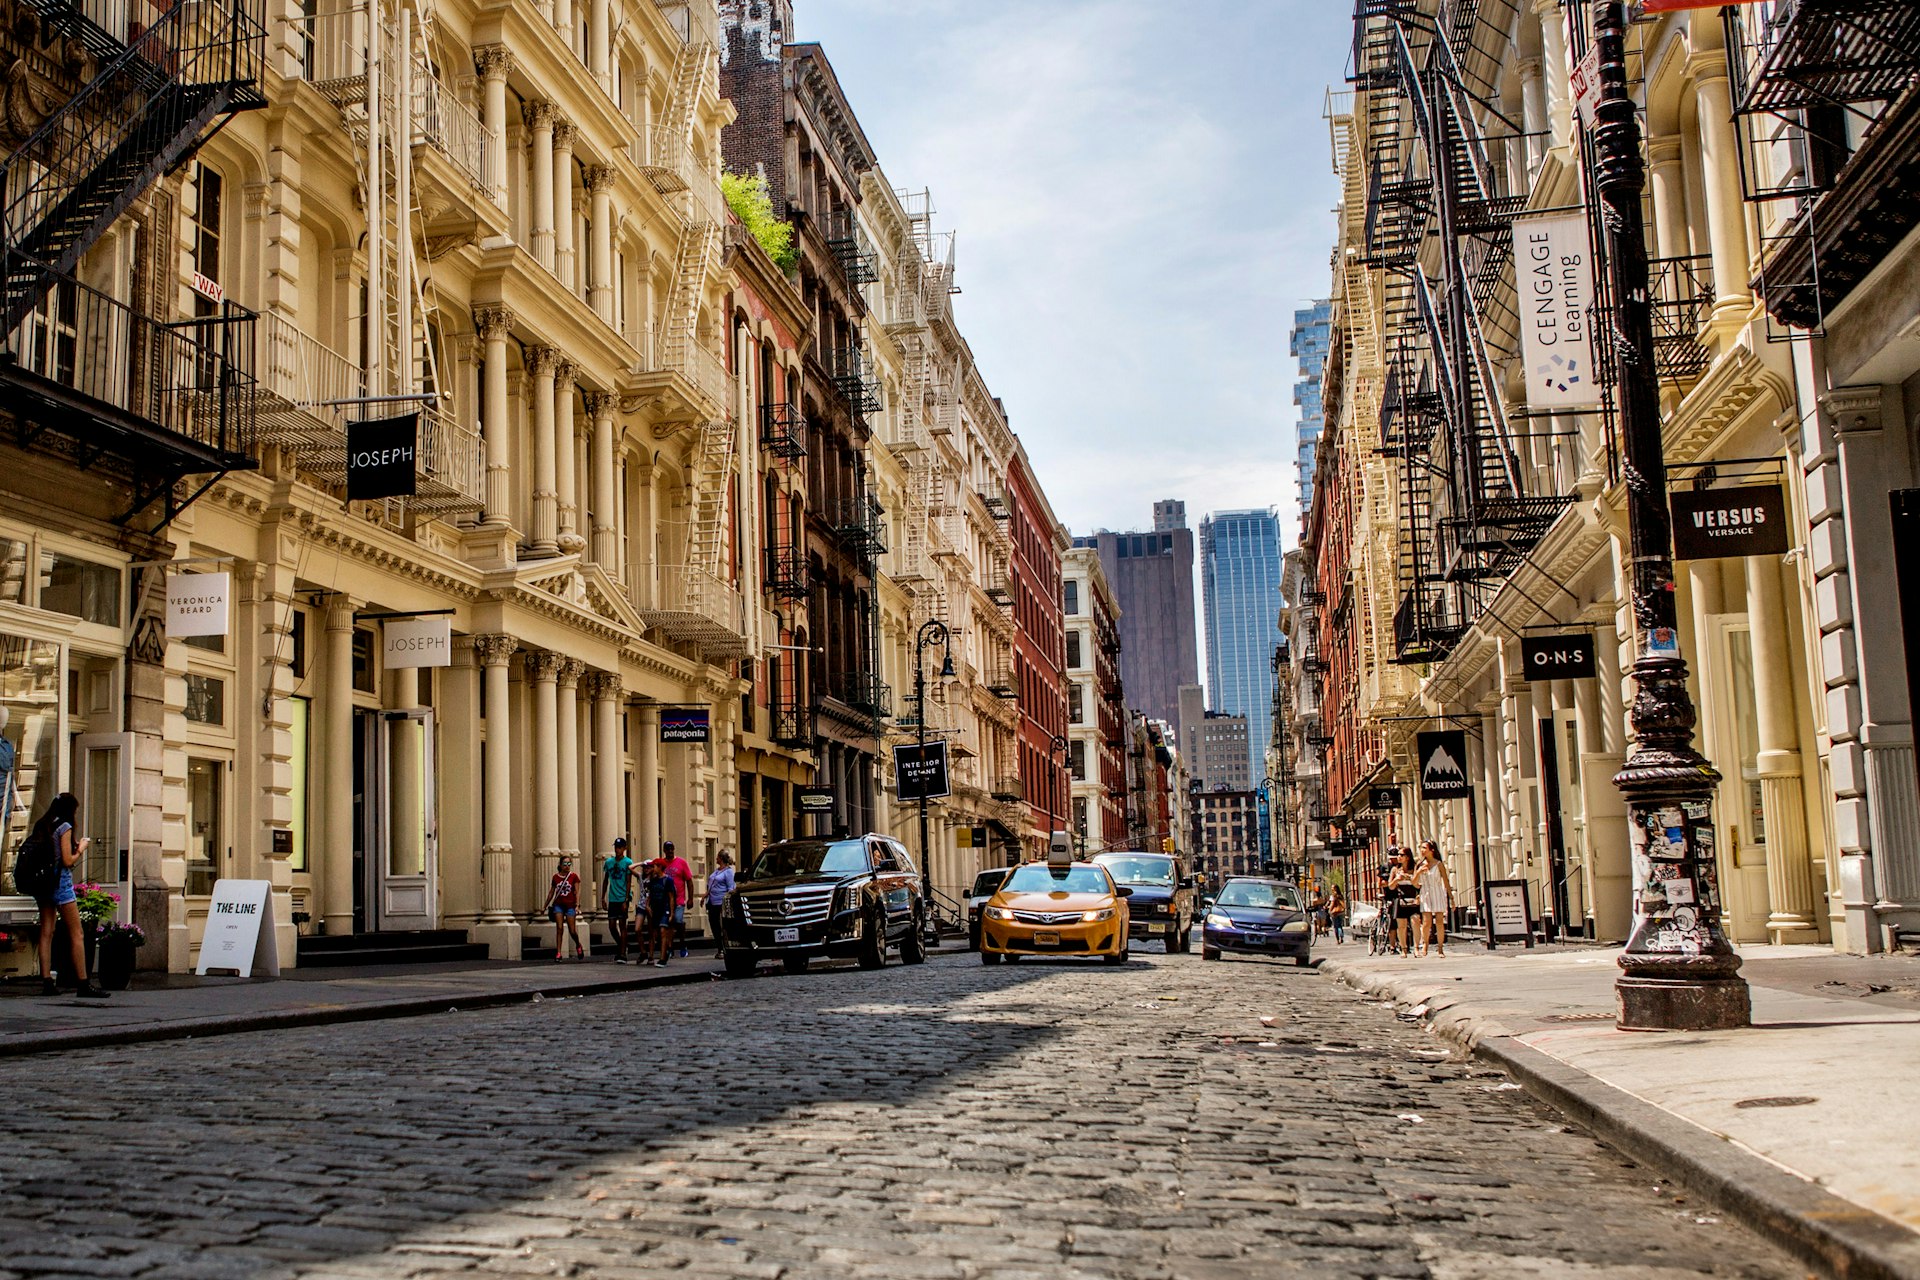 A cobblestone street in Soho with taxis, pedestrians and shops lining the sidewalks